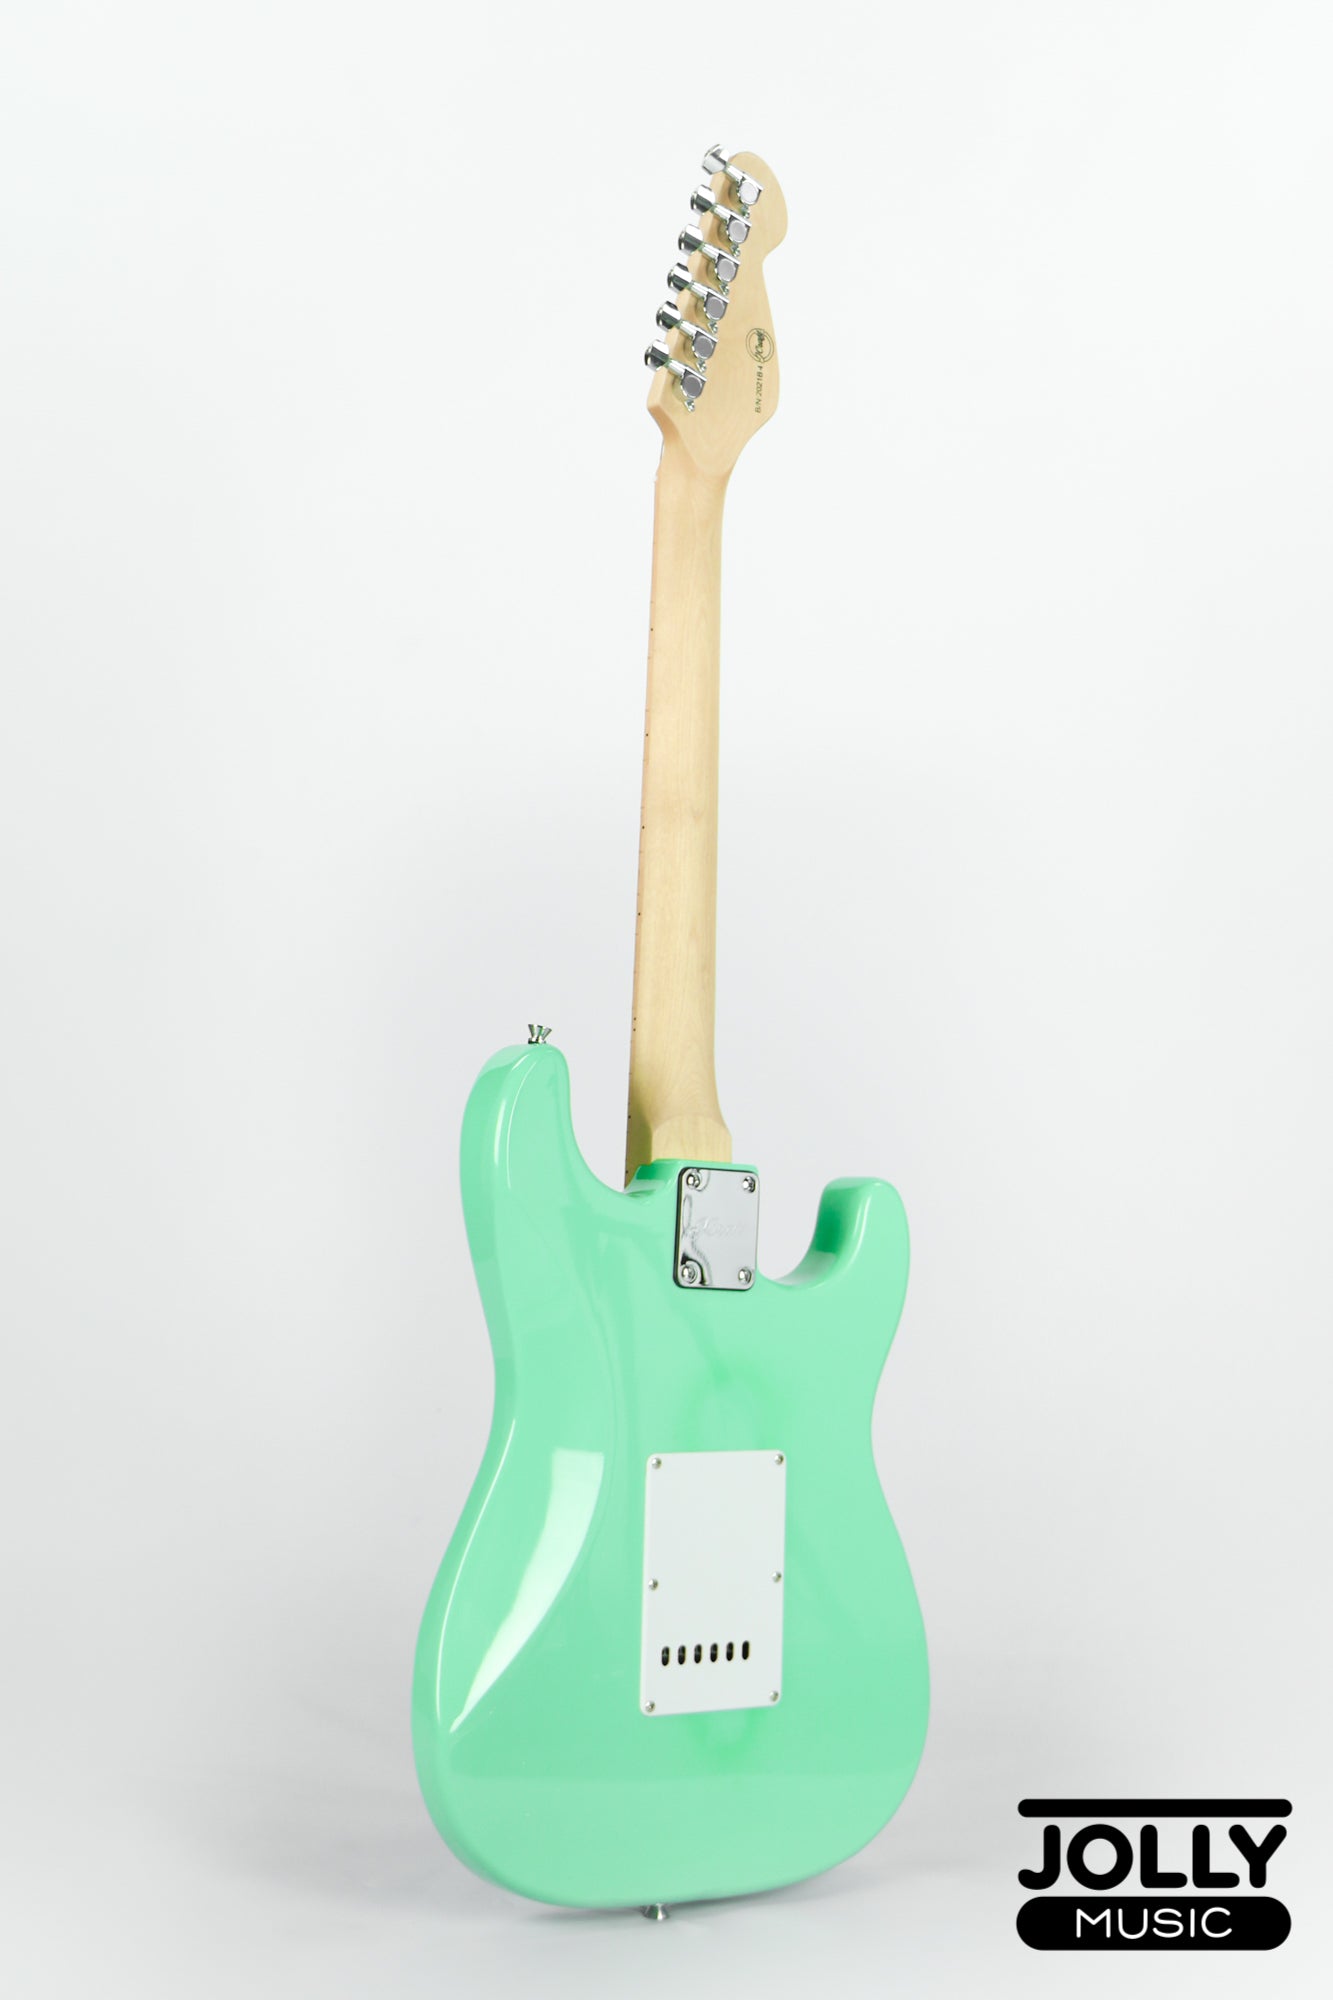 JCraft S-1 LEFT HAND Maple Neck S-Style Electric Guitar with Gigbag - Surf Green